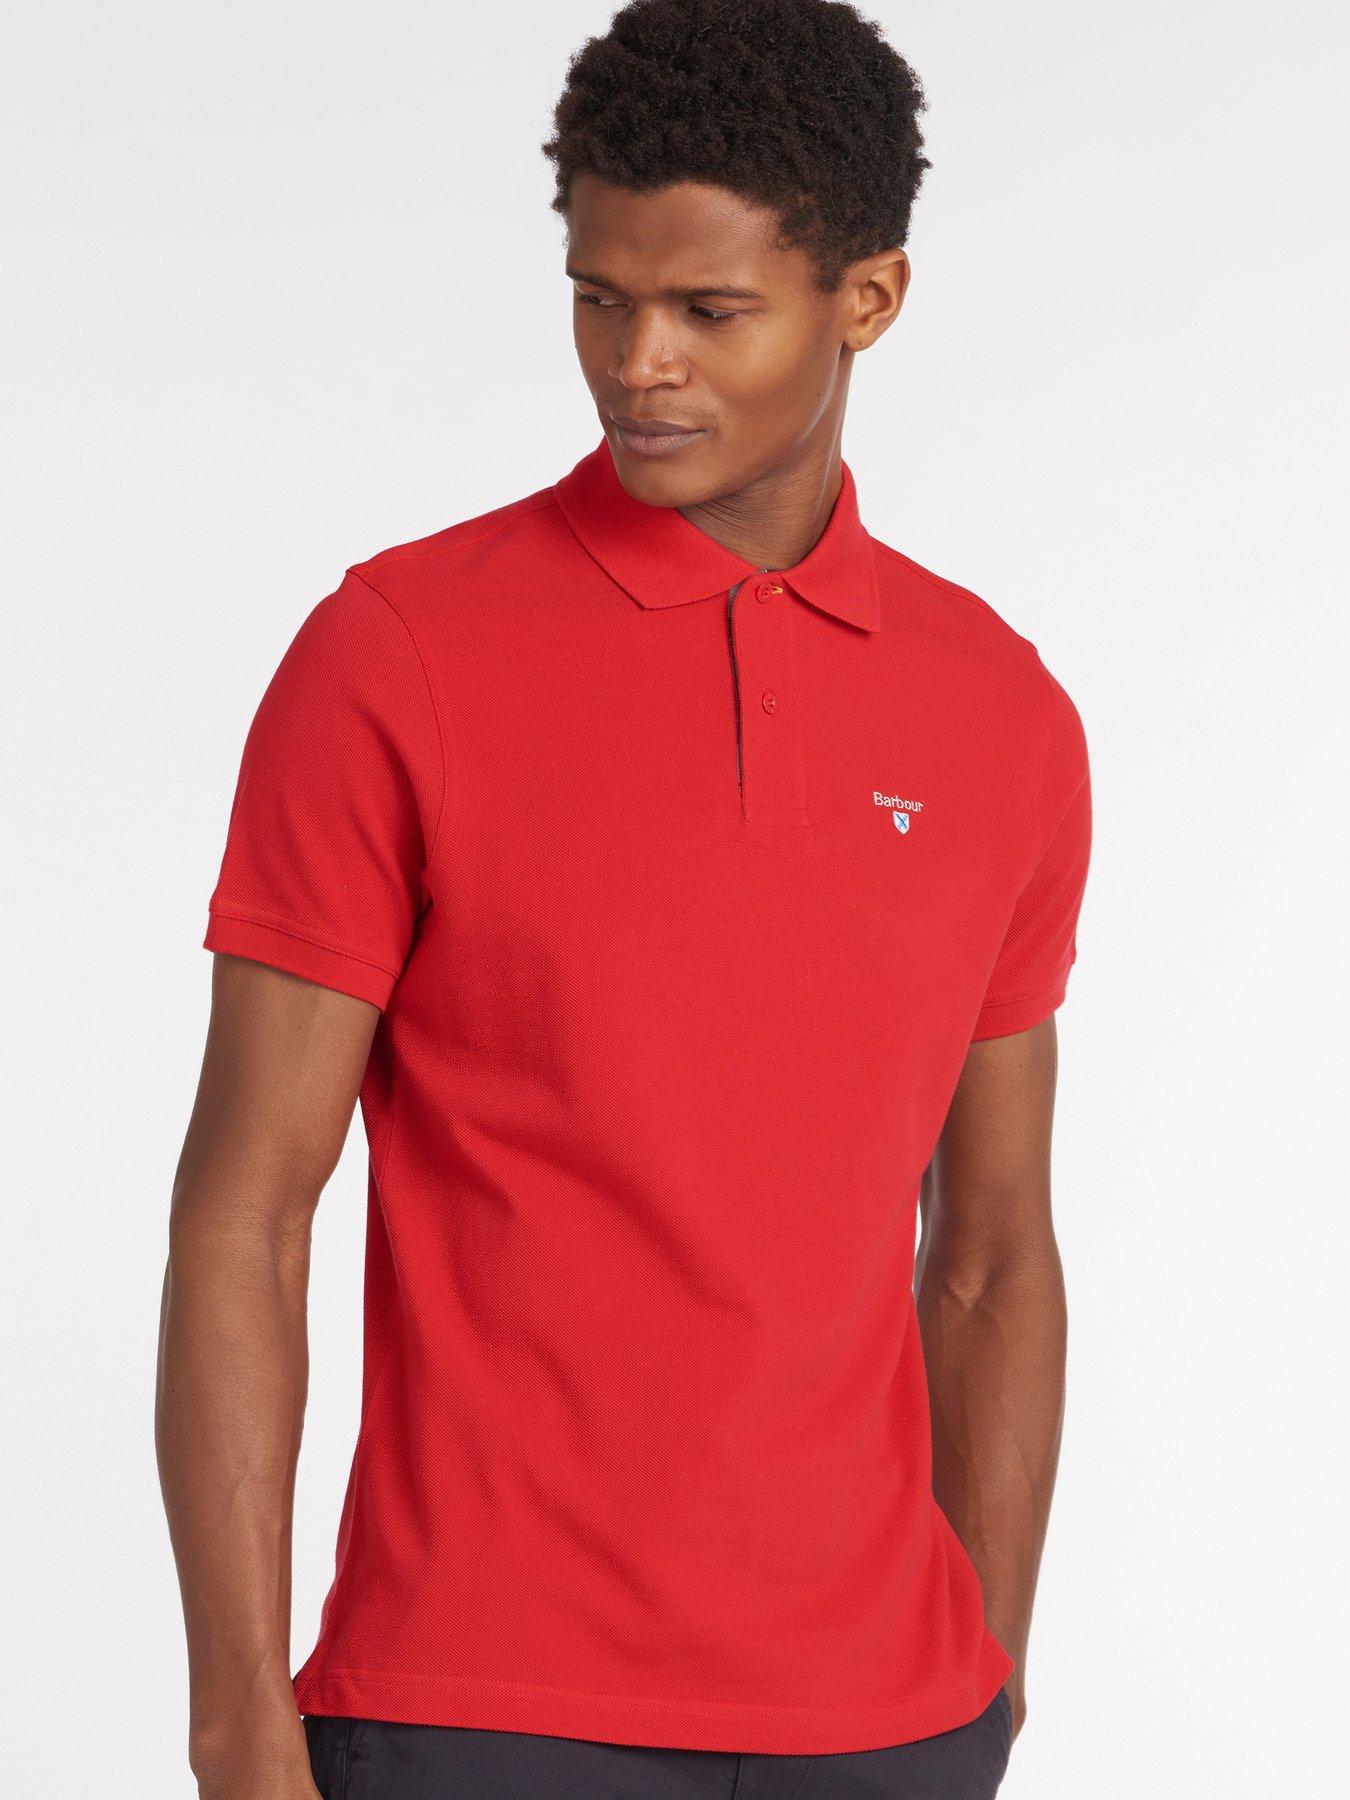 Barbour Tartan Pique Regular Fit Polo Shirt - Bright Red | very.co.uk